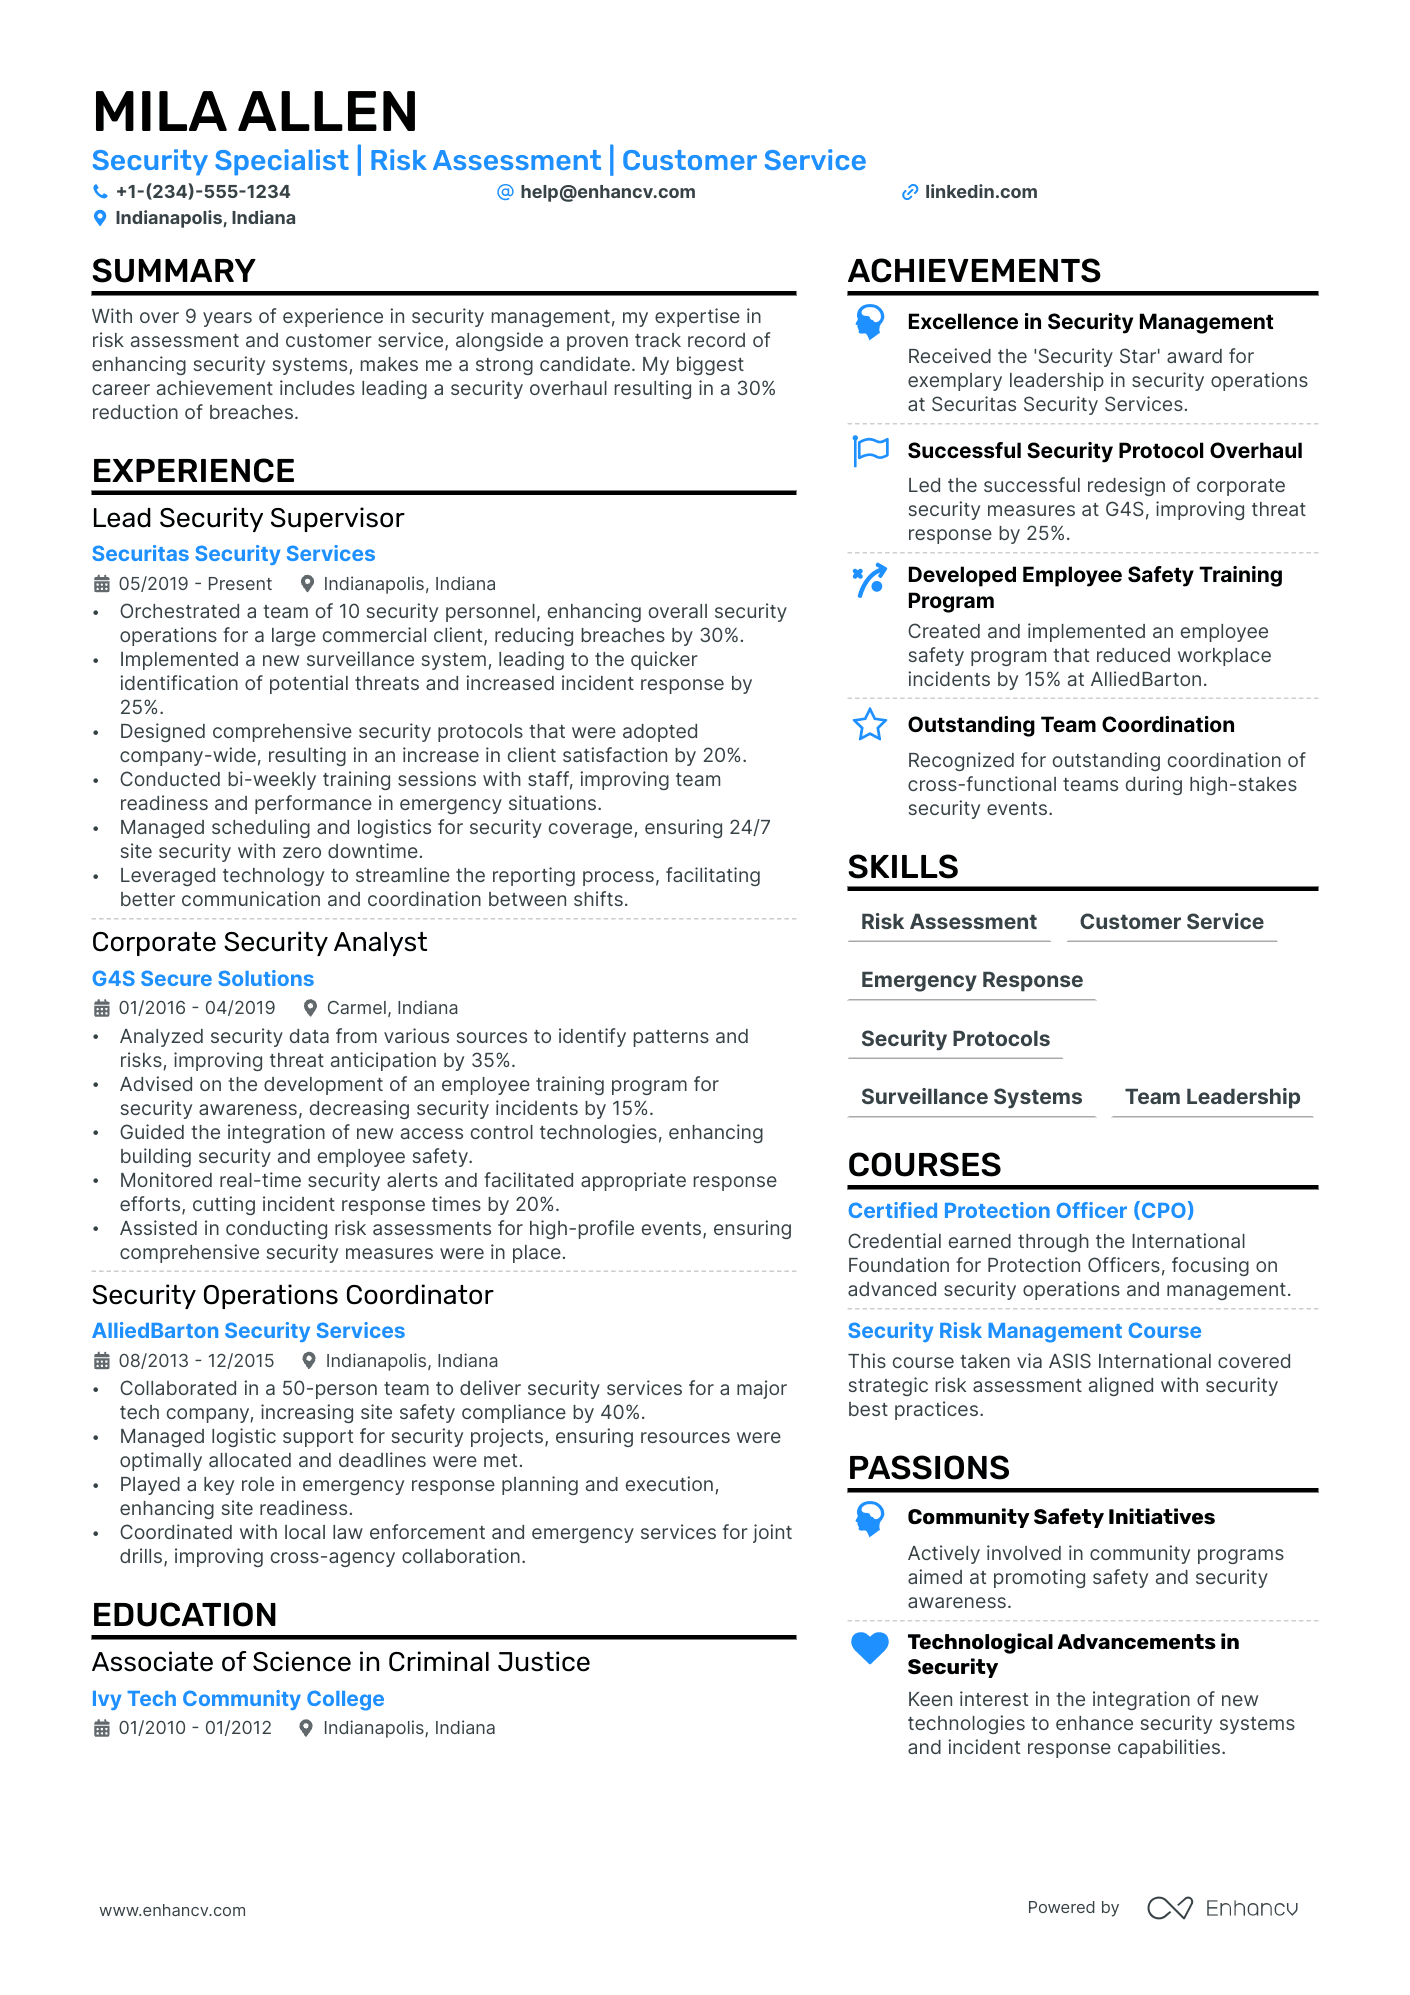 High End Retail resume example